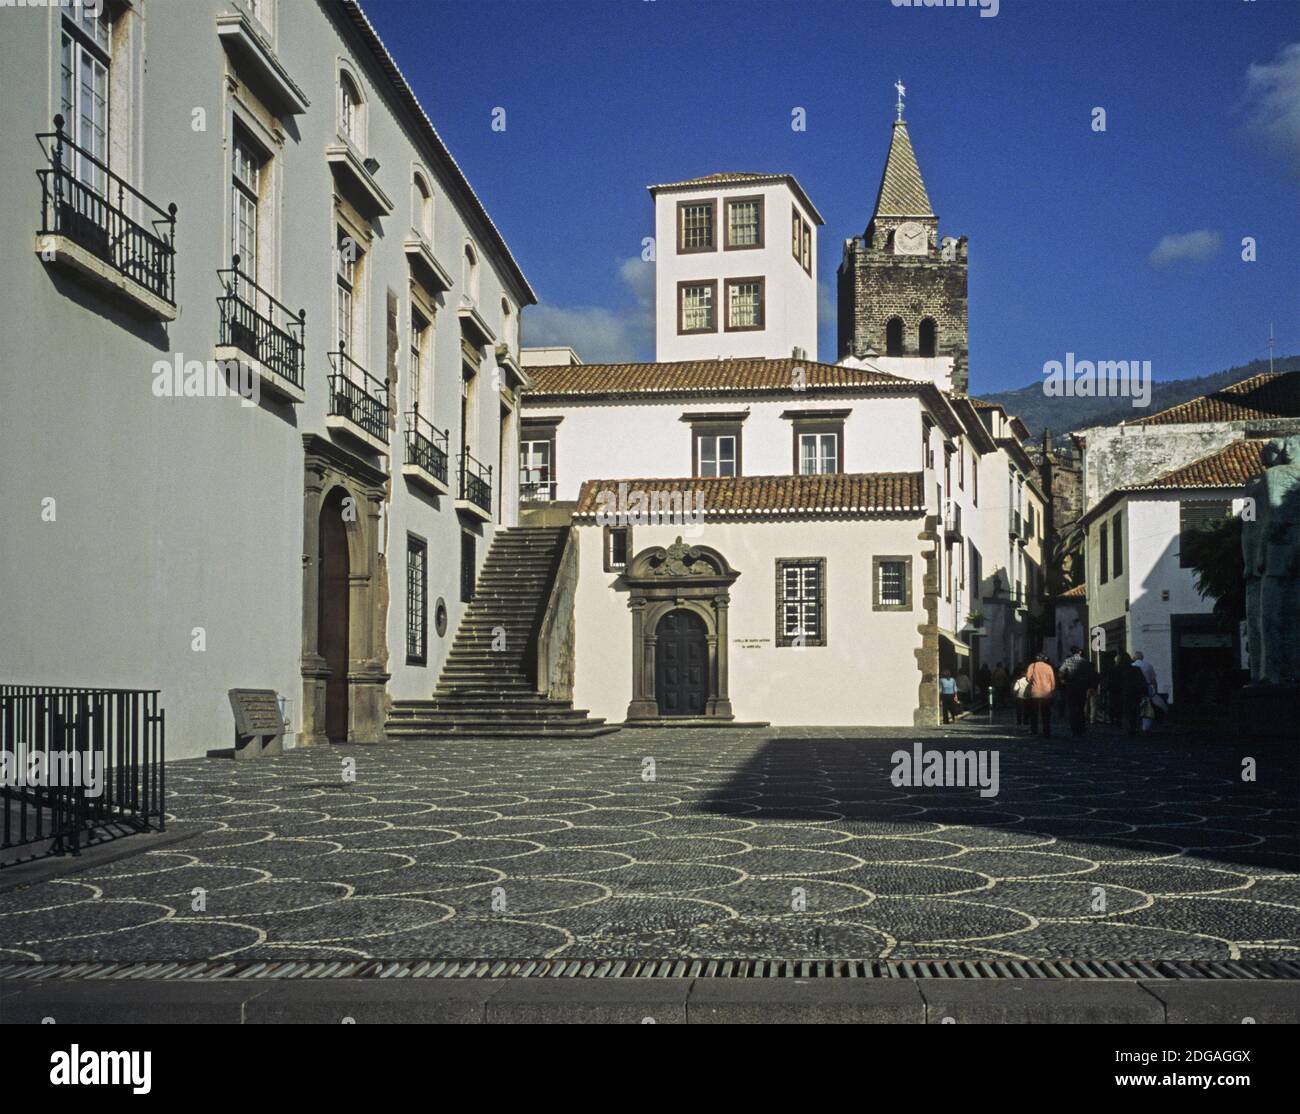 capela de Santo Antonio built in 1716 Saint Anthony Chapel and Se cathedral tower in the old part of Funchal Madeira Island Portugal Stock Photo